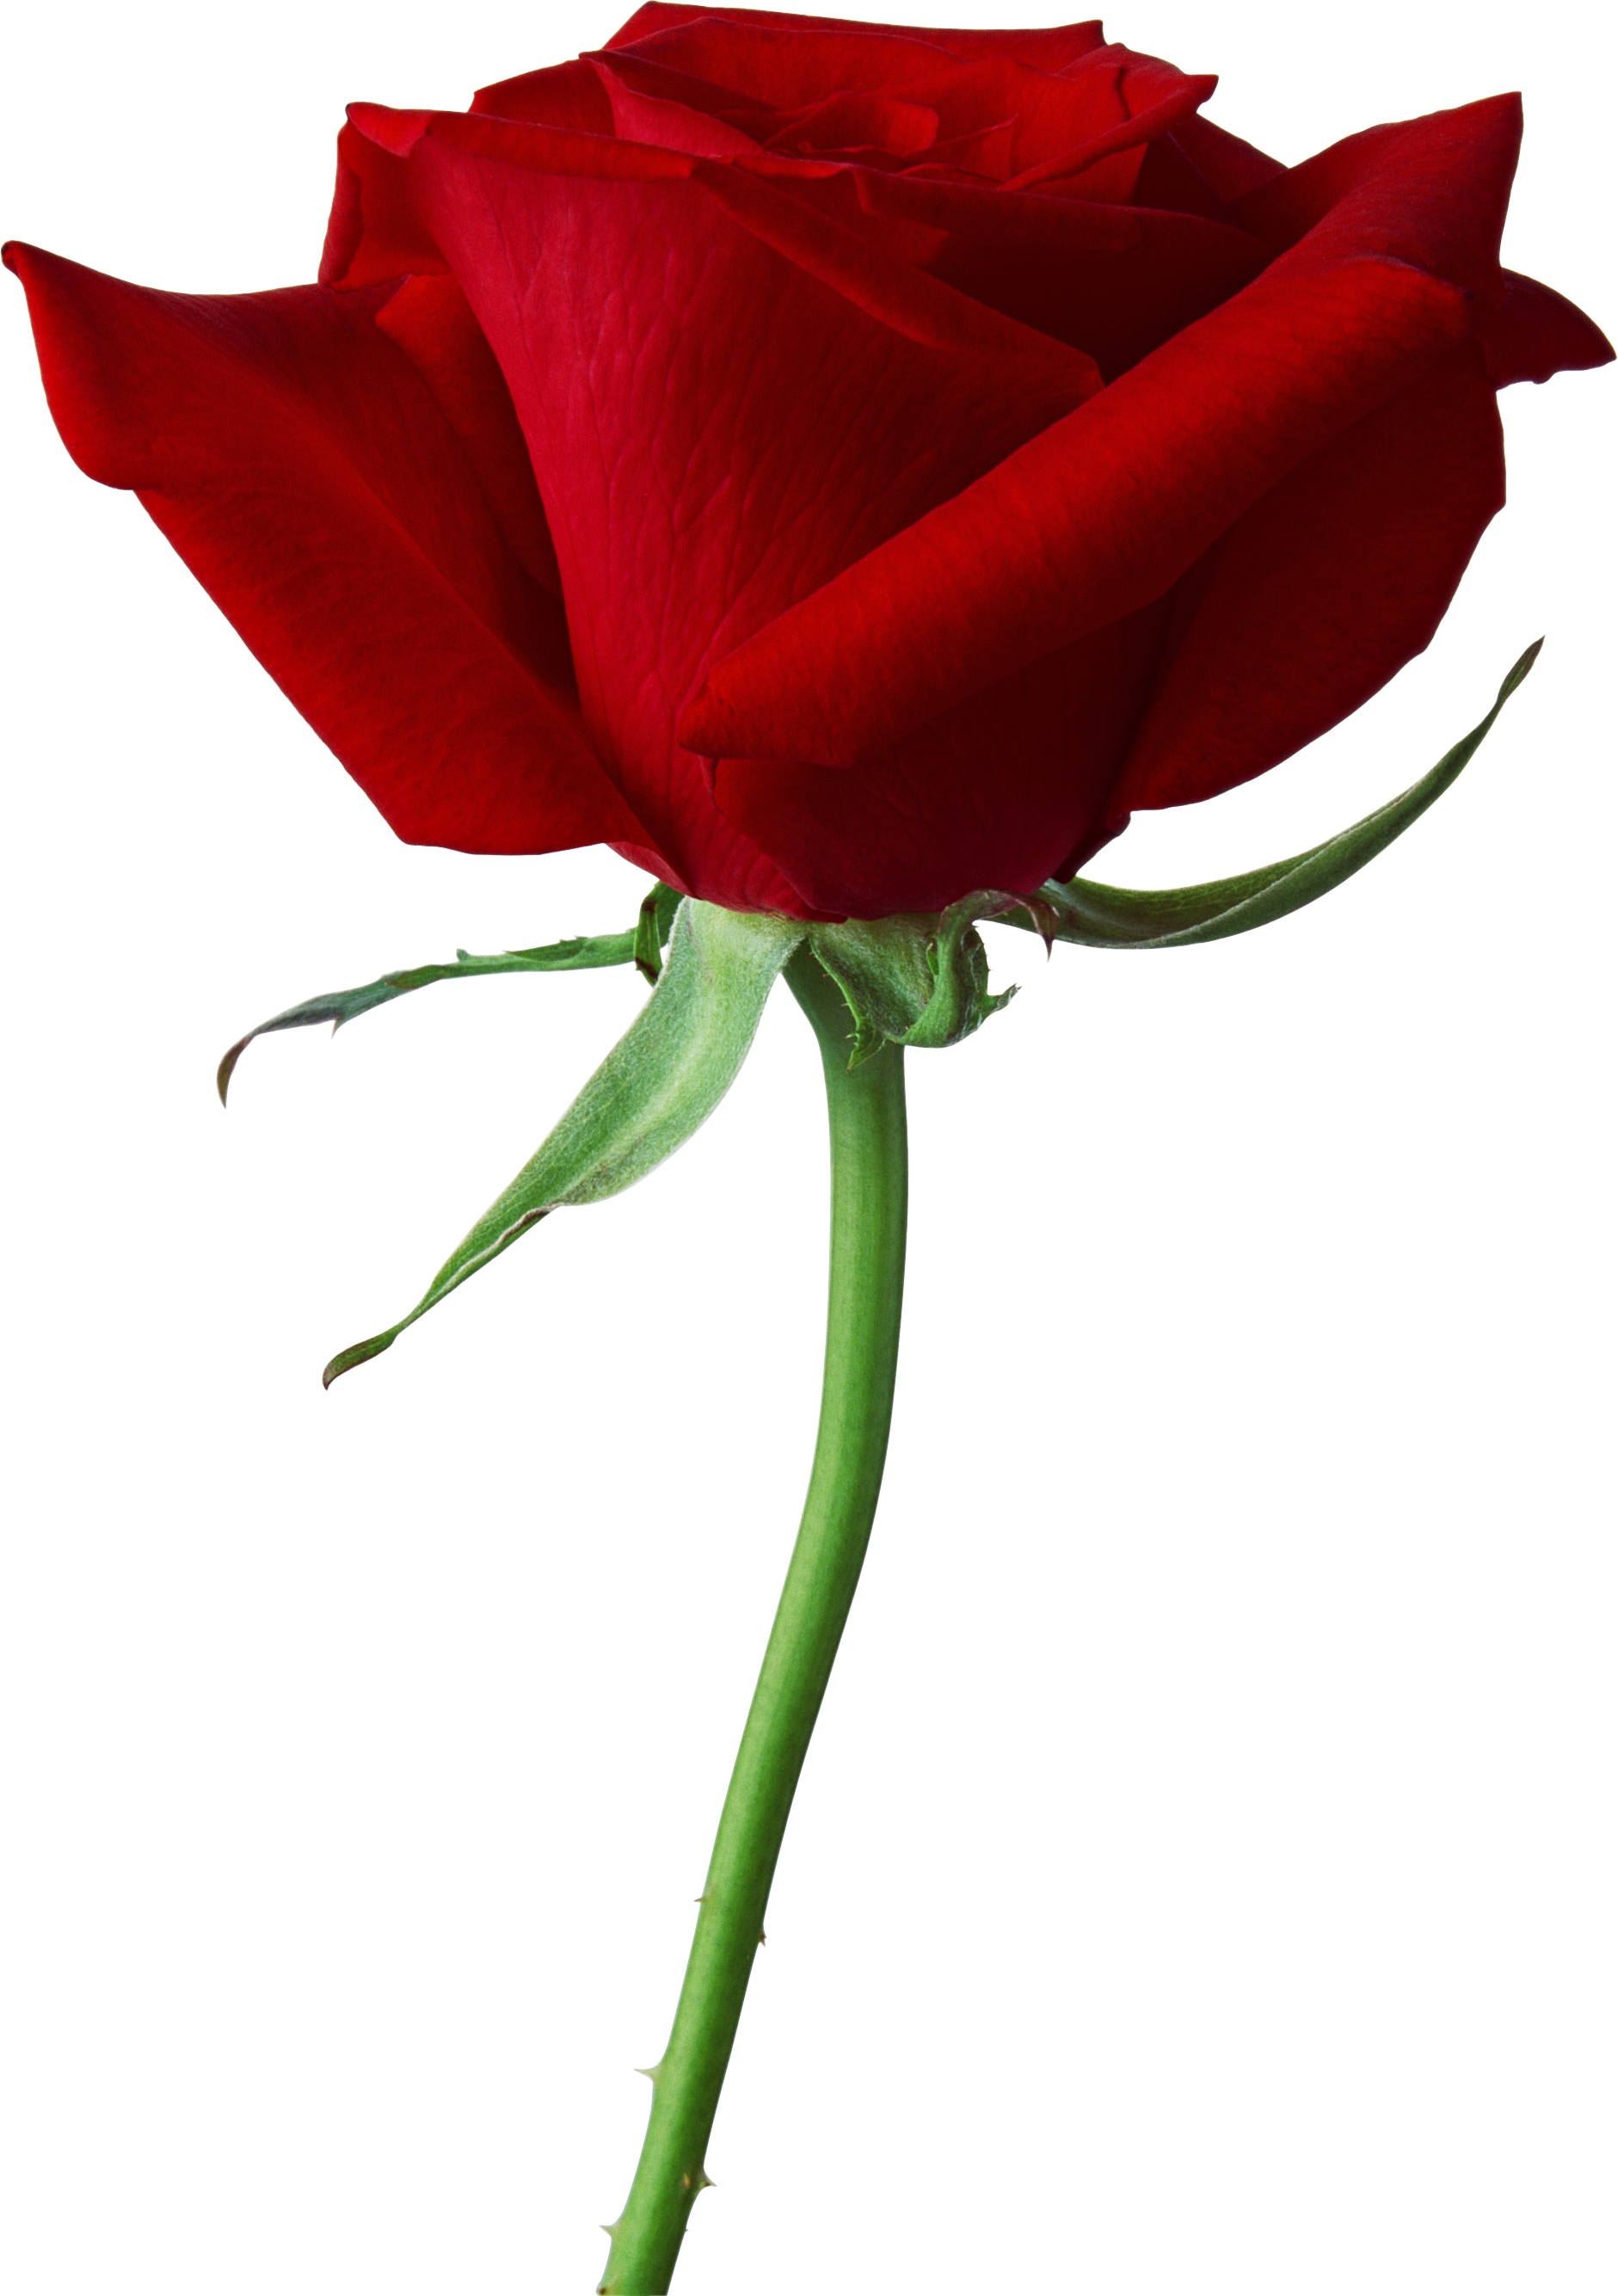 Rose Png Image, Free Picture Download - Rose, Transparent background PNG HD thumbnail